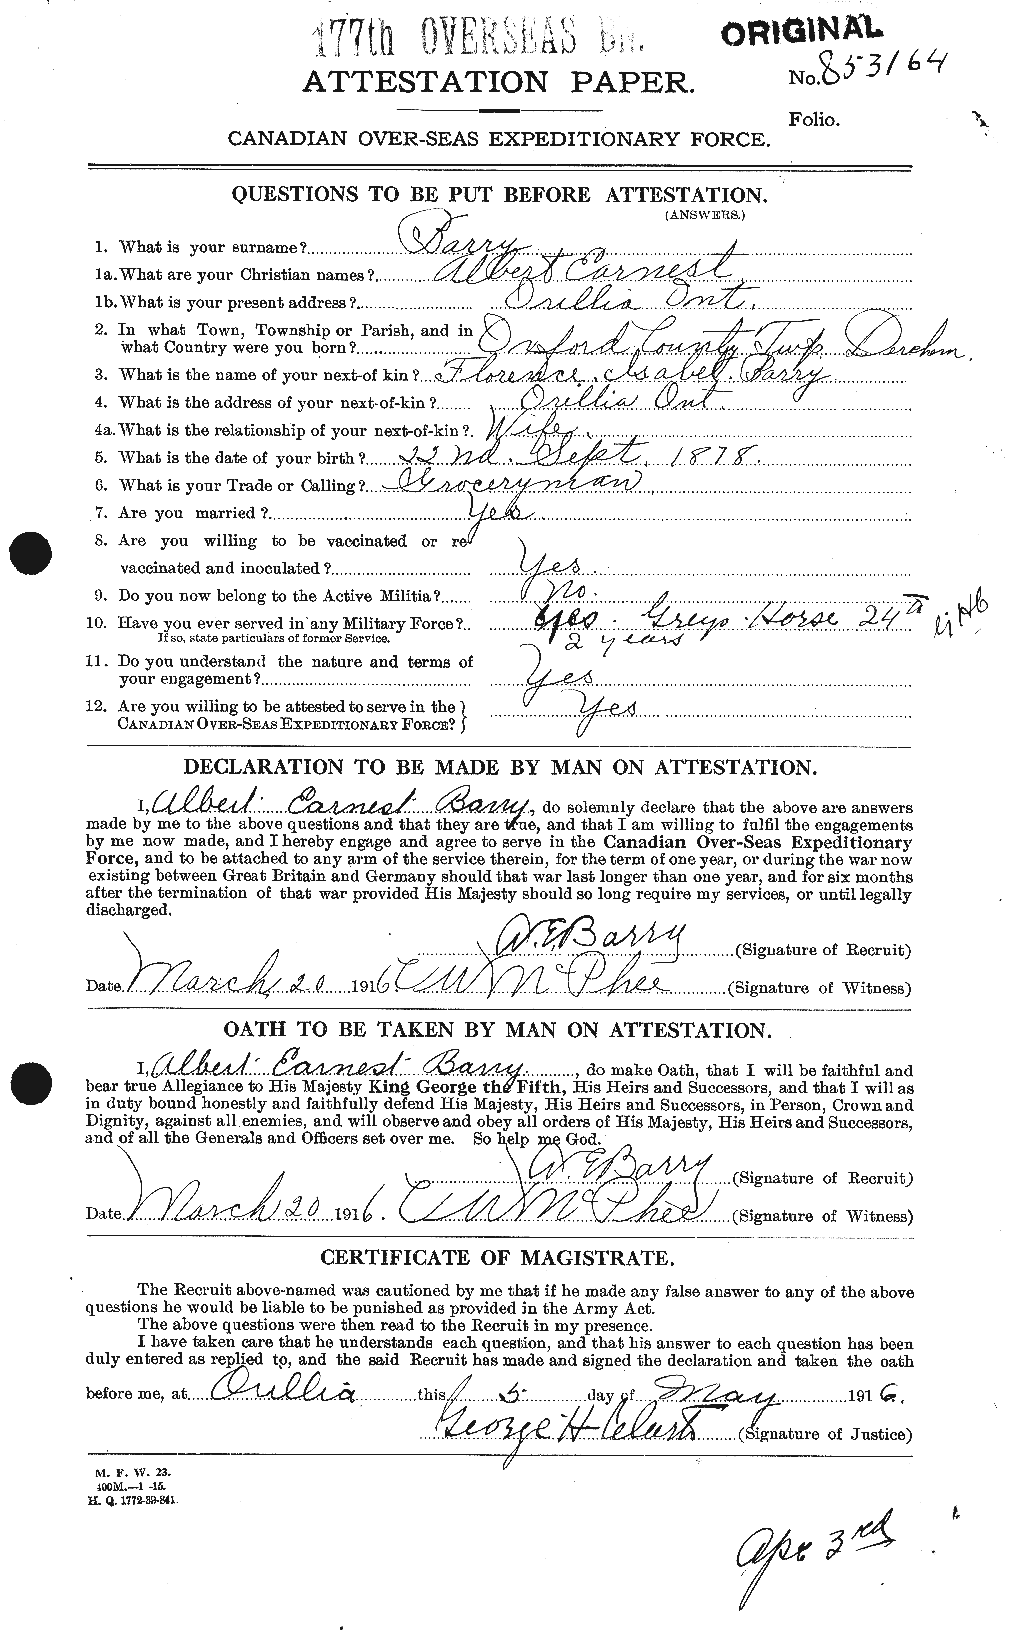 Personnel Records of the First World War - CEF 222393a